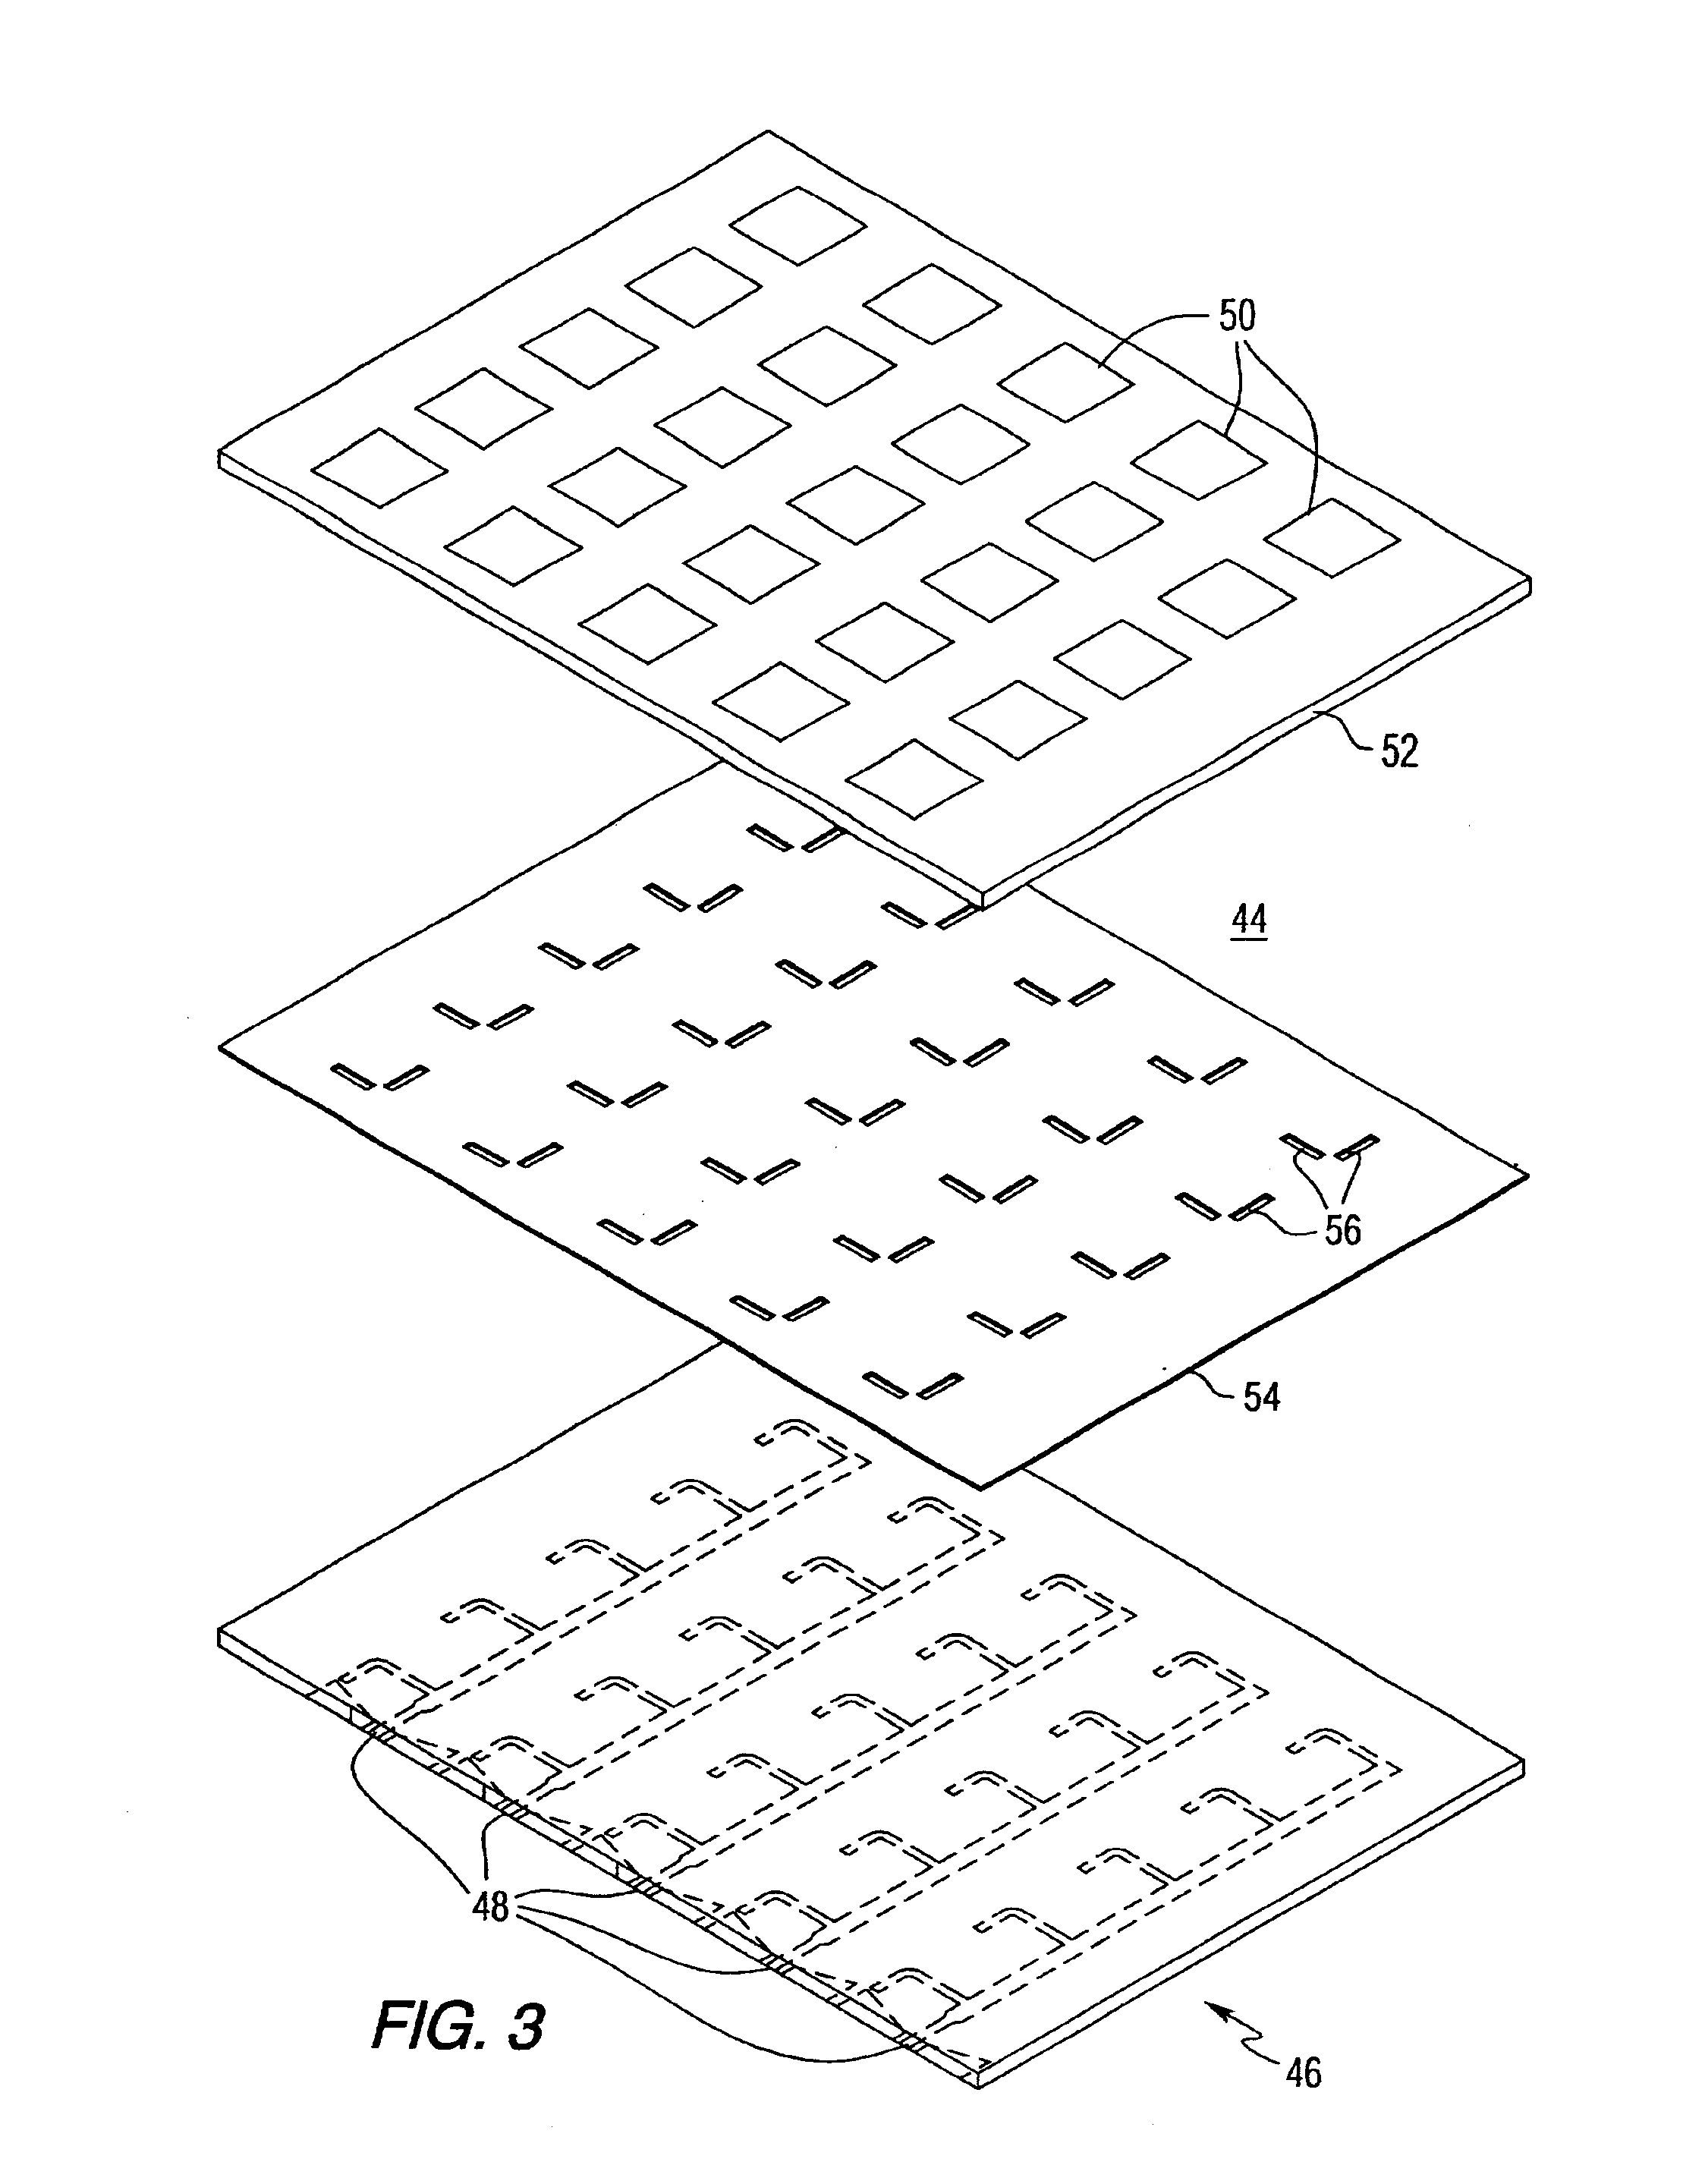 Serially-fed phased array antennas with dielectric phase shifters